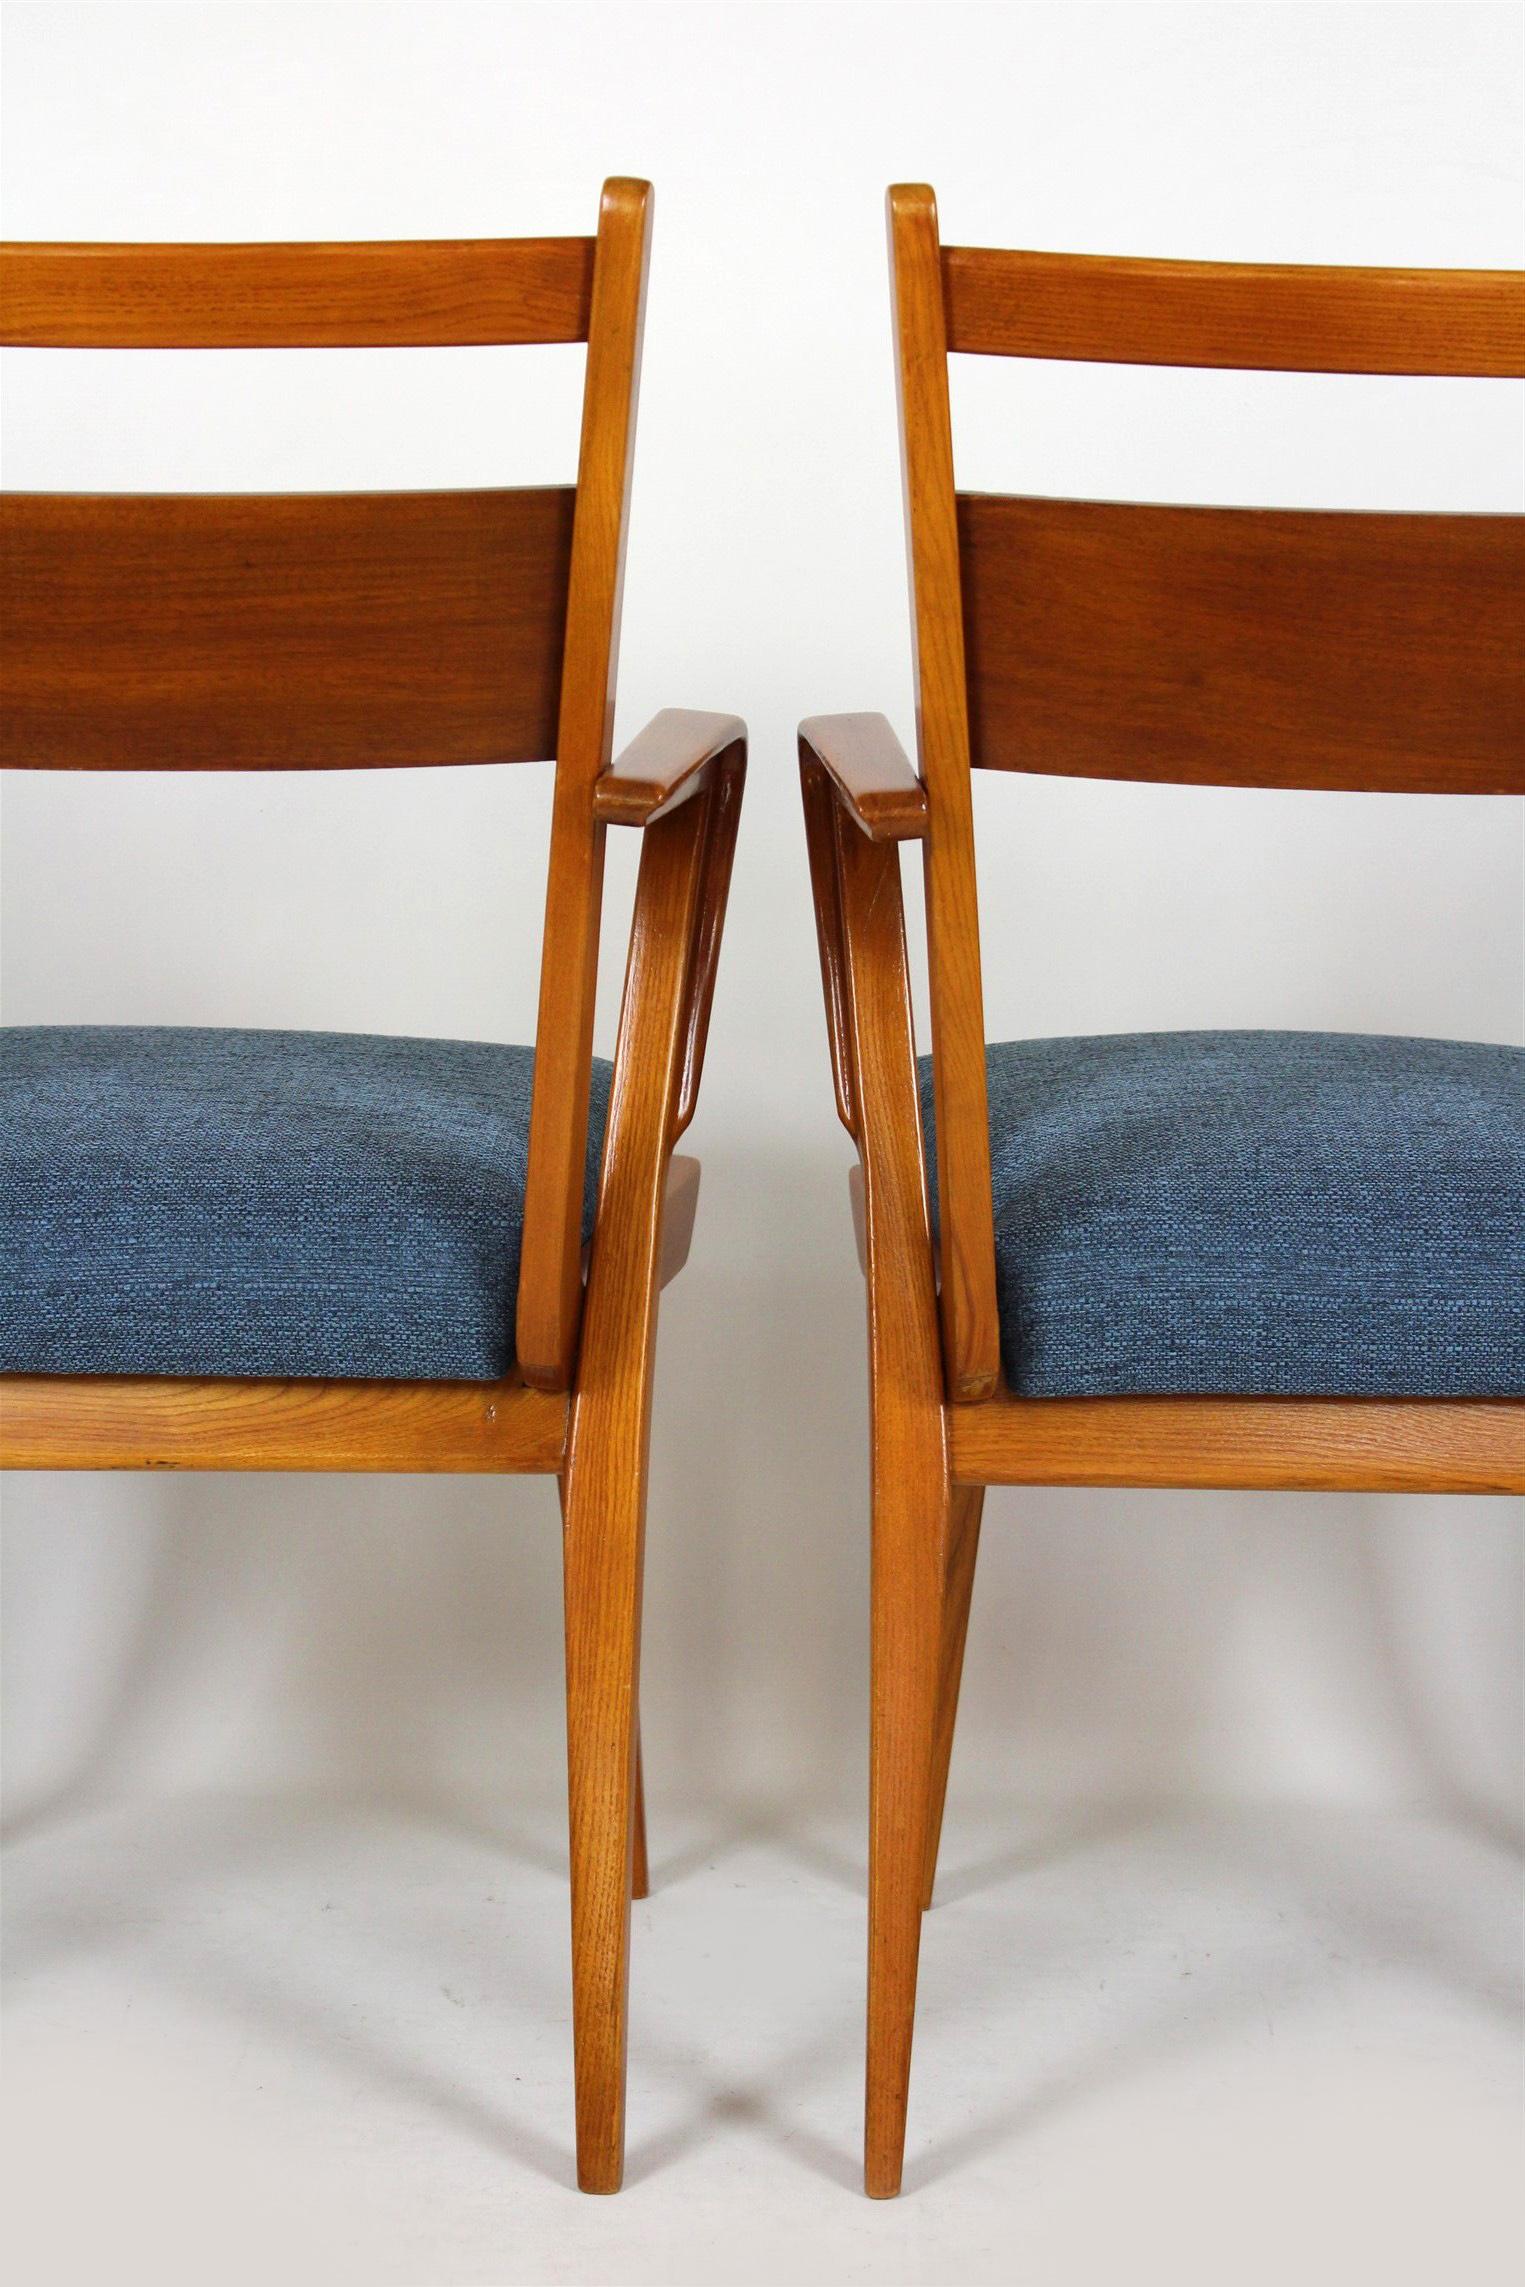 20th Century Ash and Walnut Dining Chairs from Jitona Sobeslav, 1950s, Set of Four